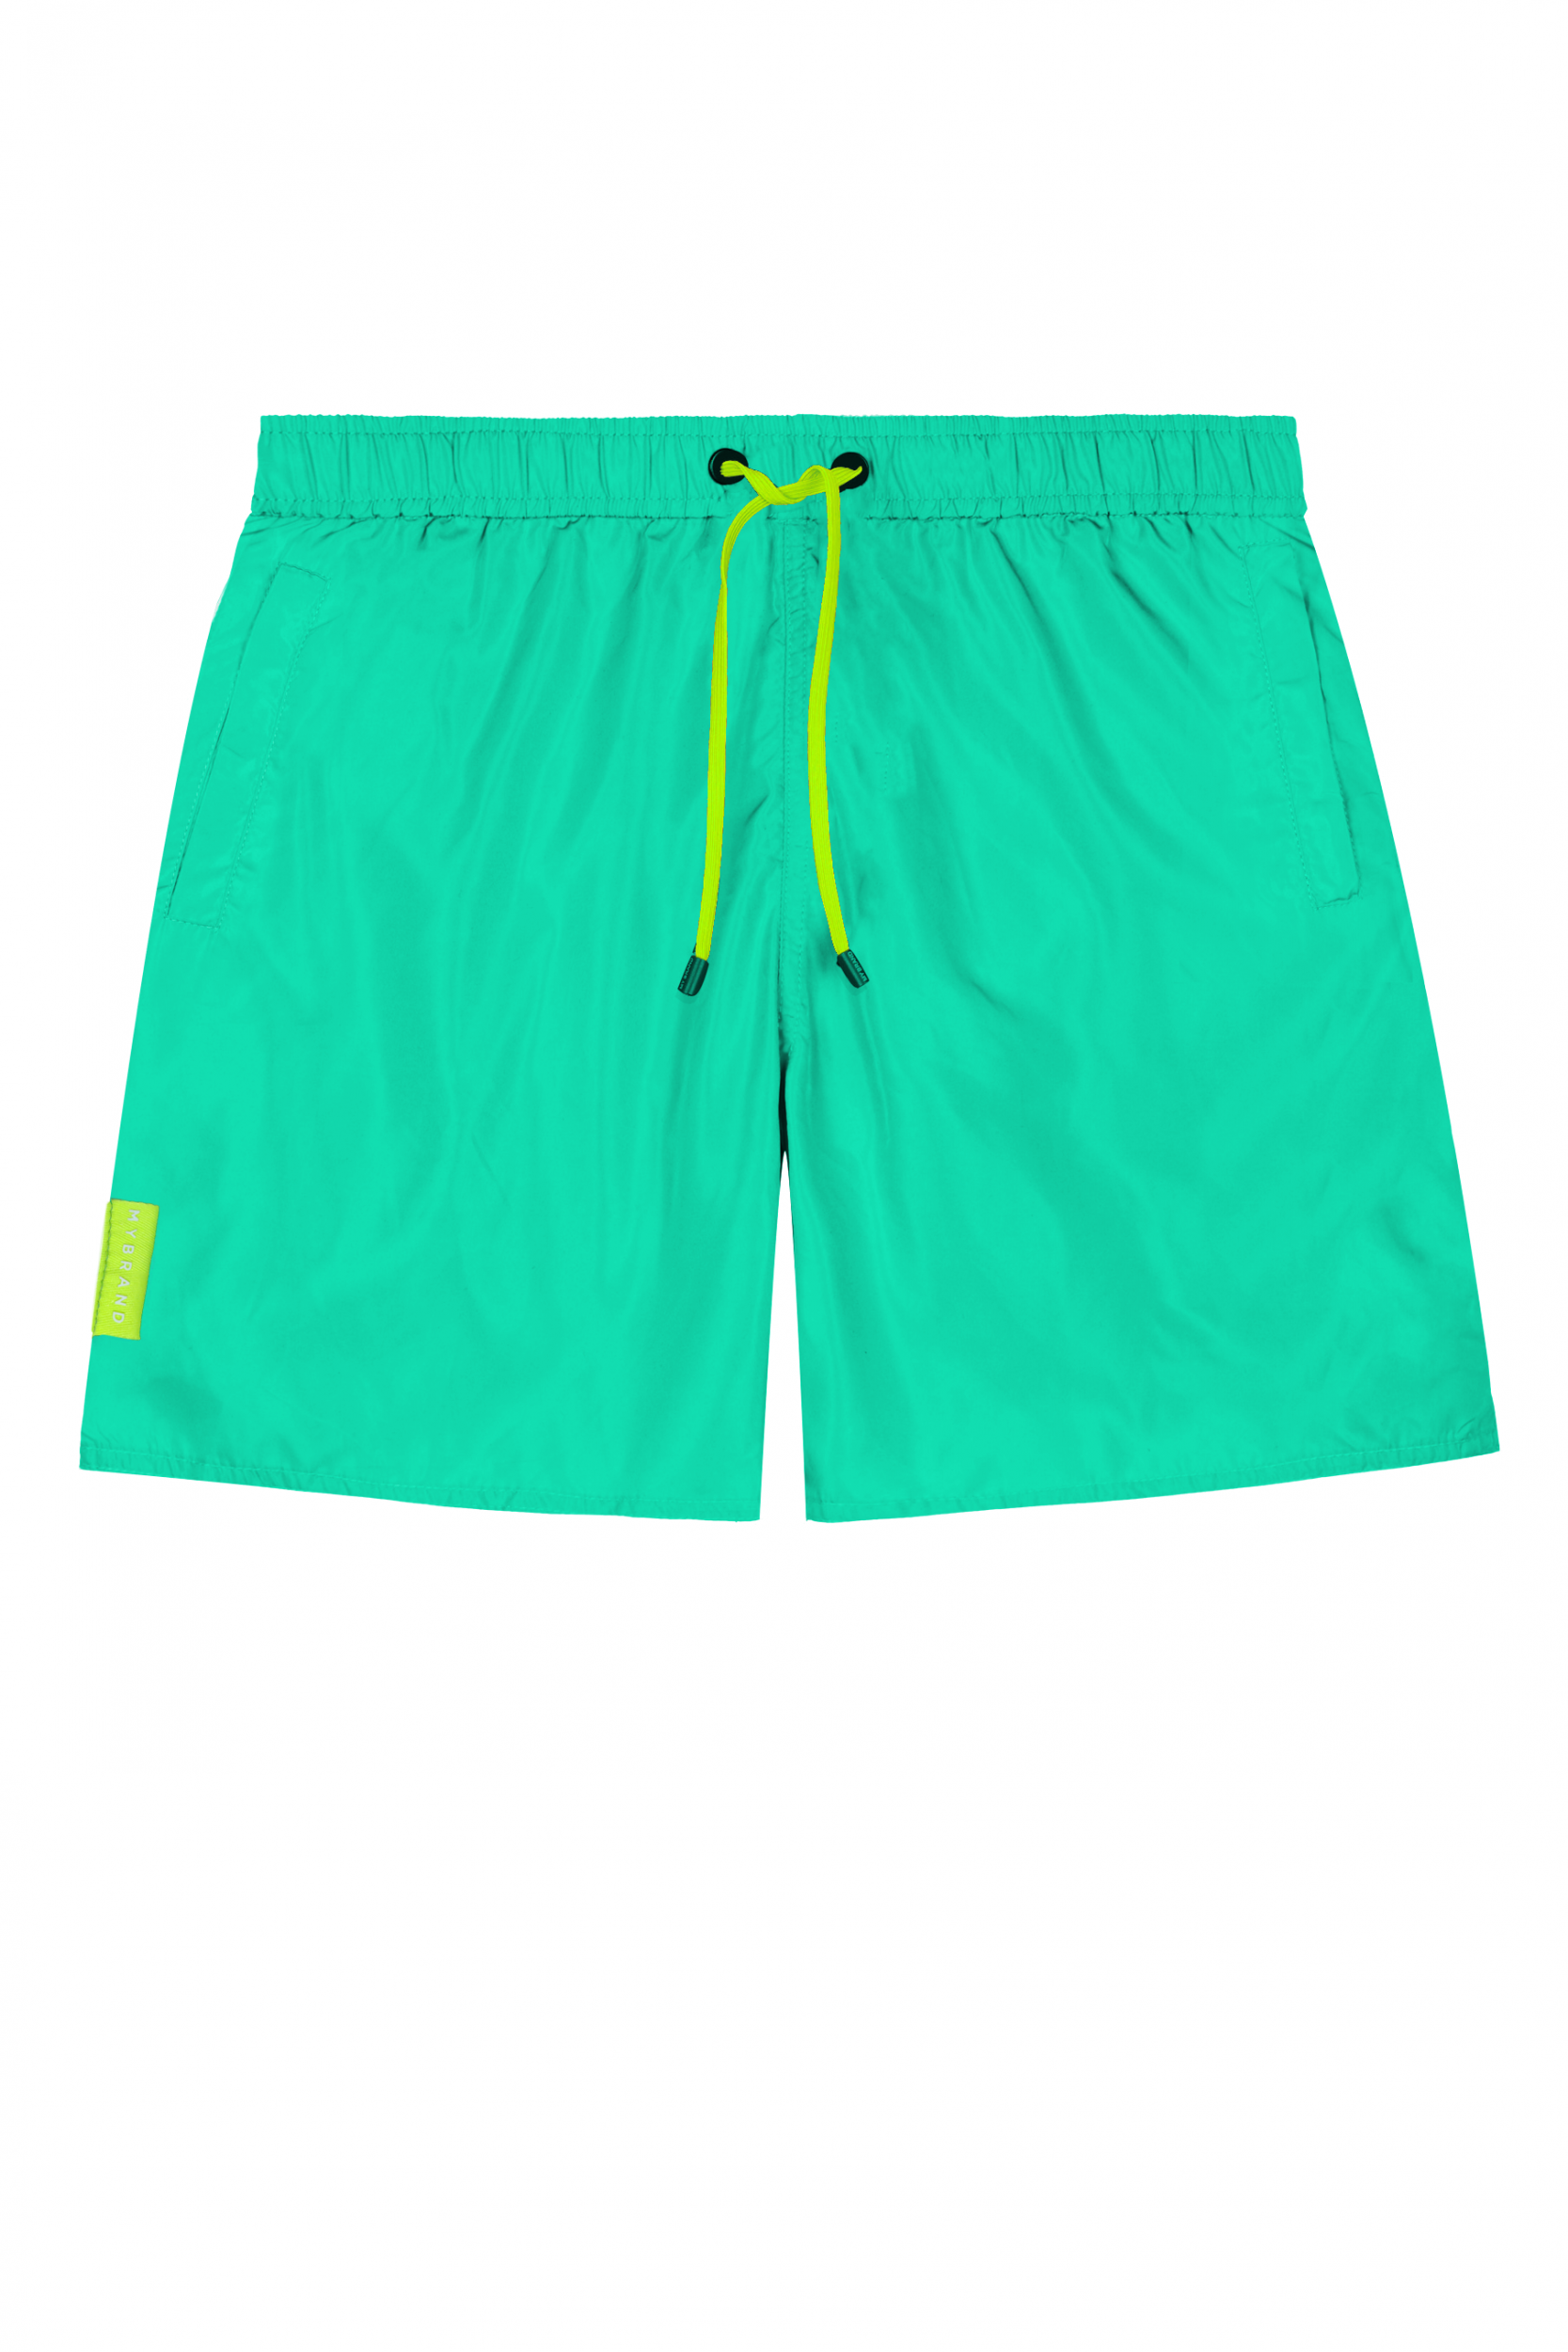 MB TAPING GRADIENT SHORT | TURQUOISE